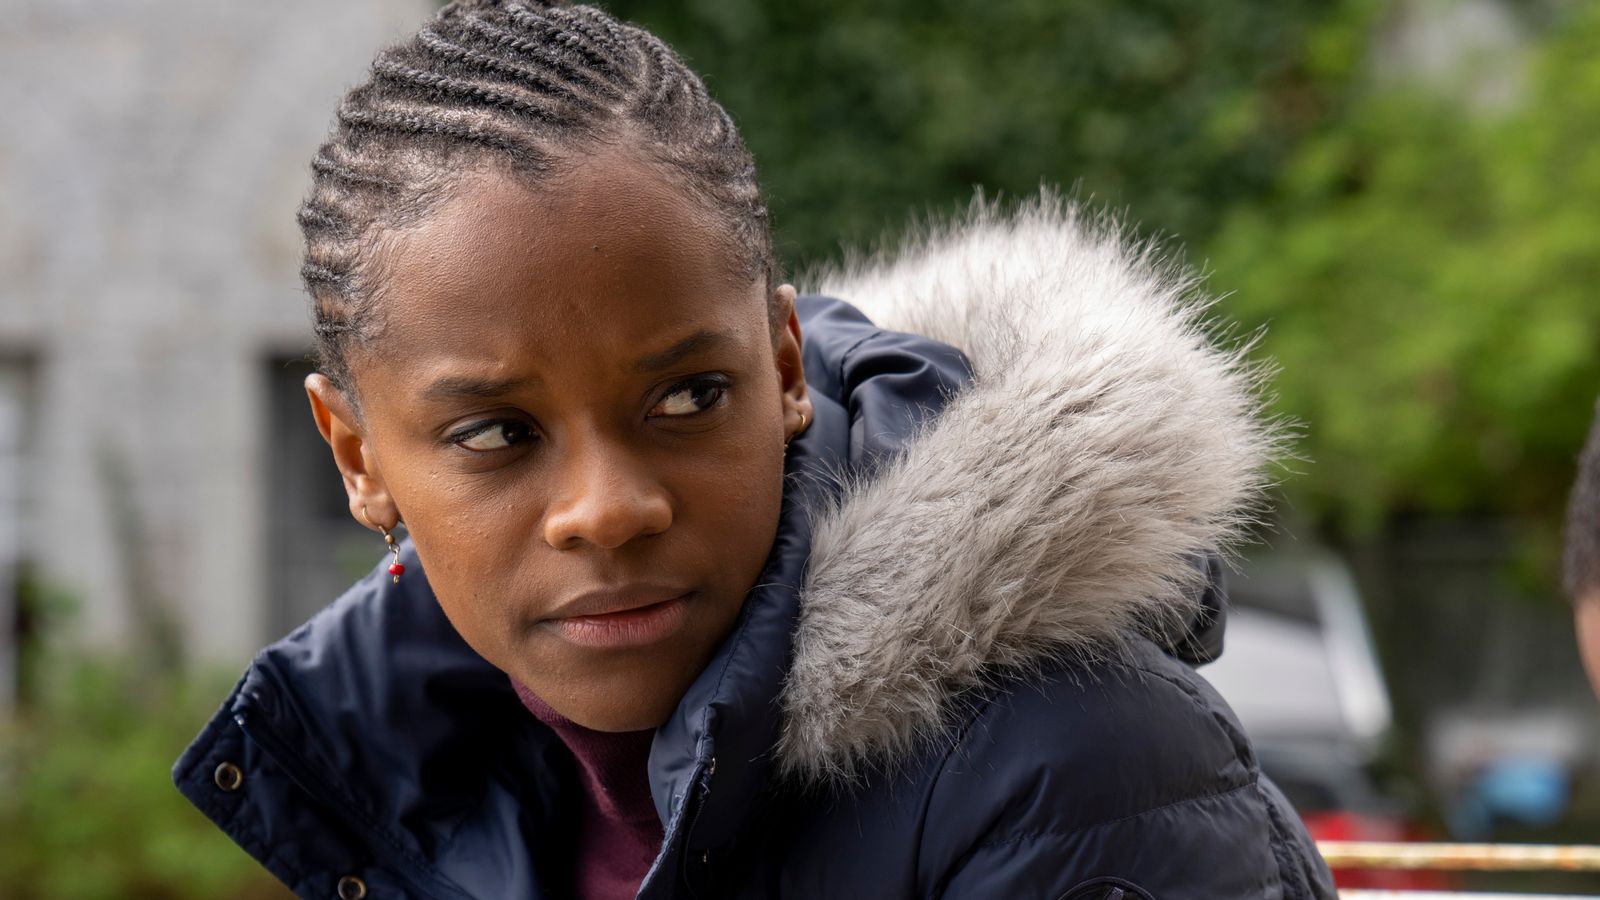 Letitia Wright on Aisha: Black Panther star says new film tackling the struggles of asylum seekers in Ireland helps give 'voice to the voiceless'